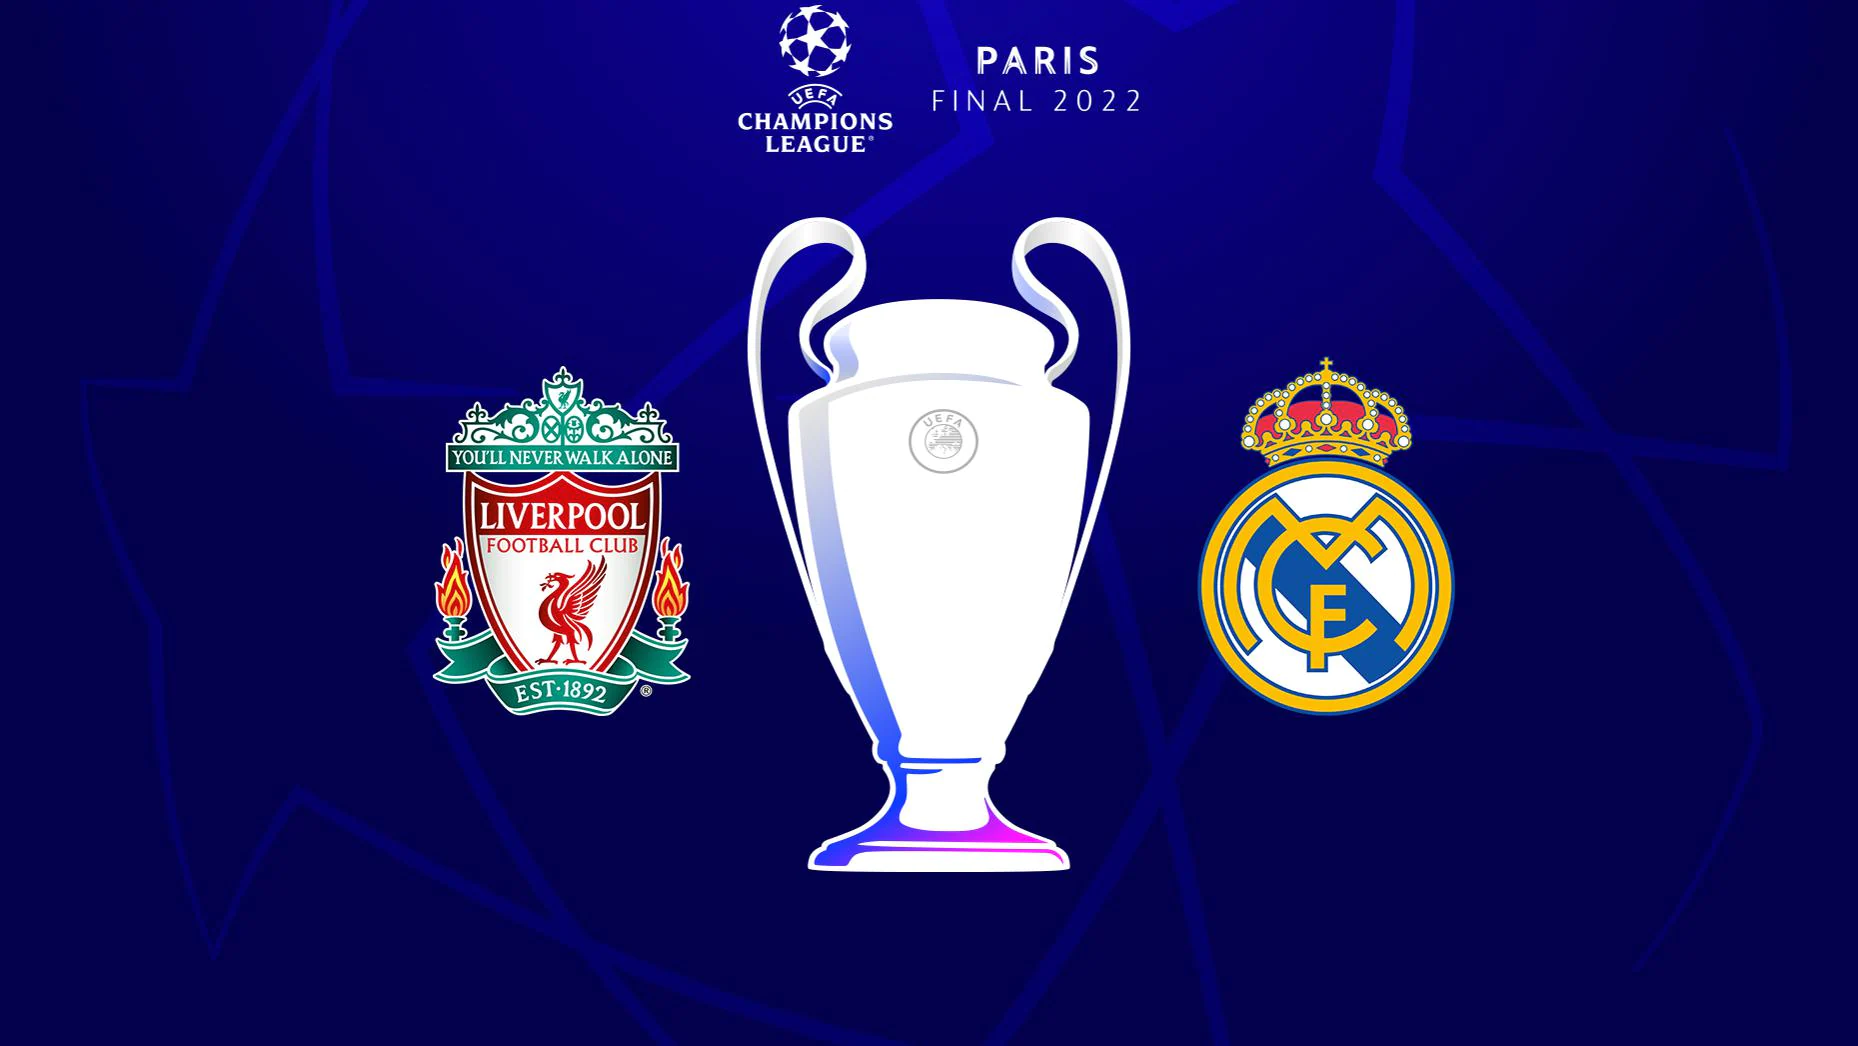 Liverpool vs Real Madrid in Champions League final